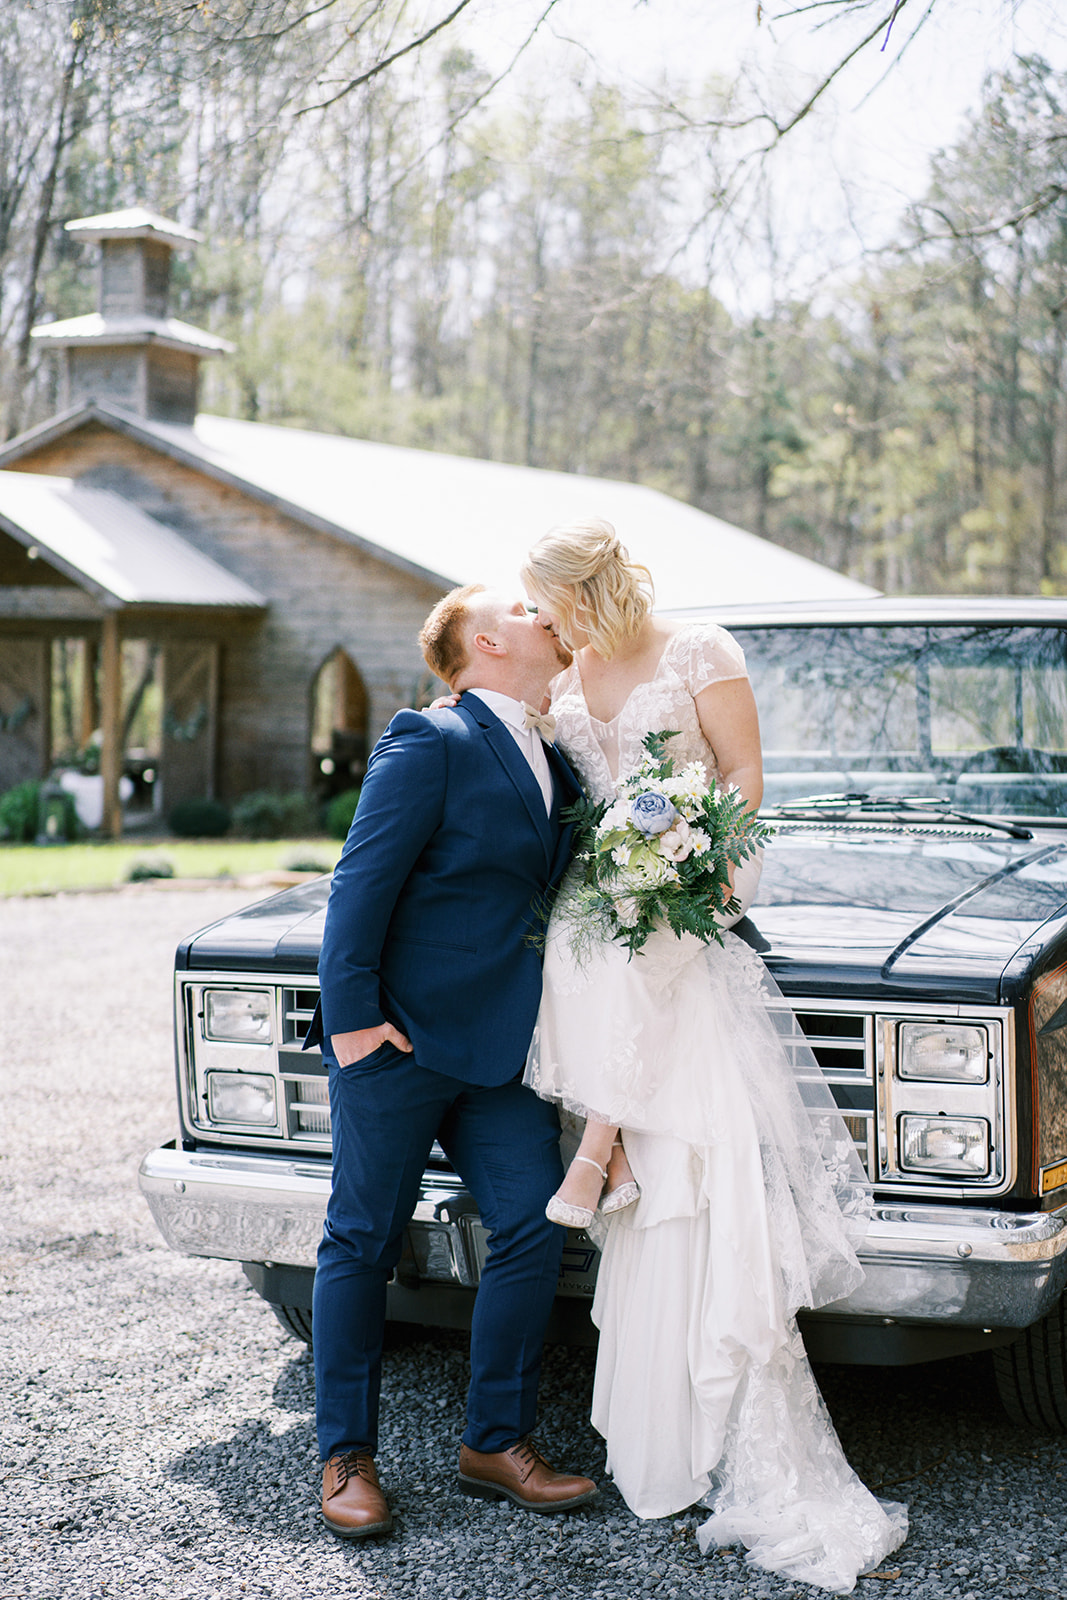 The bride sits on her old Chevrolet truck as she kisses her groom on their wedding day at Dry Creek Chapel